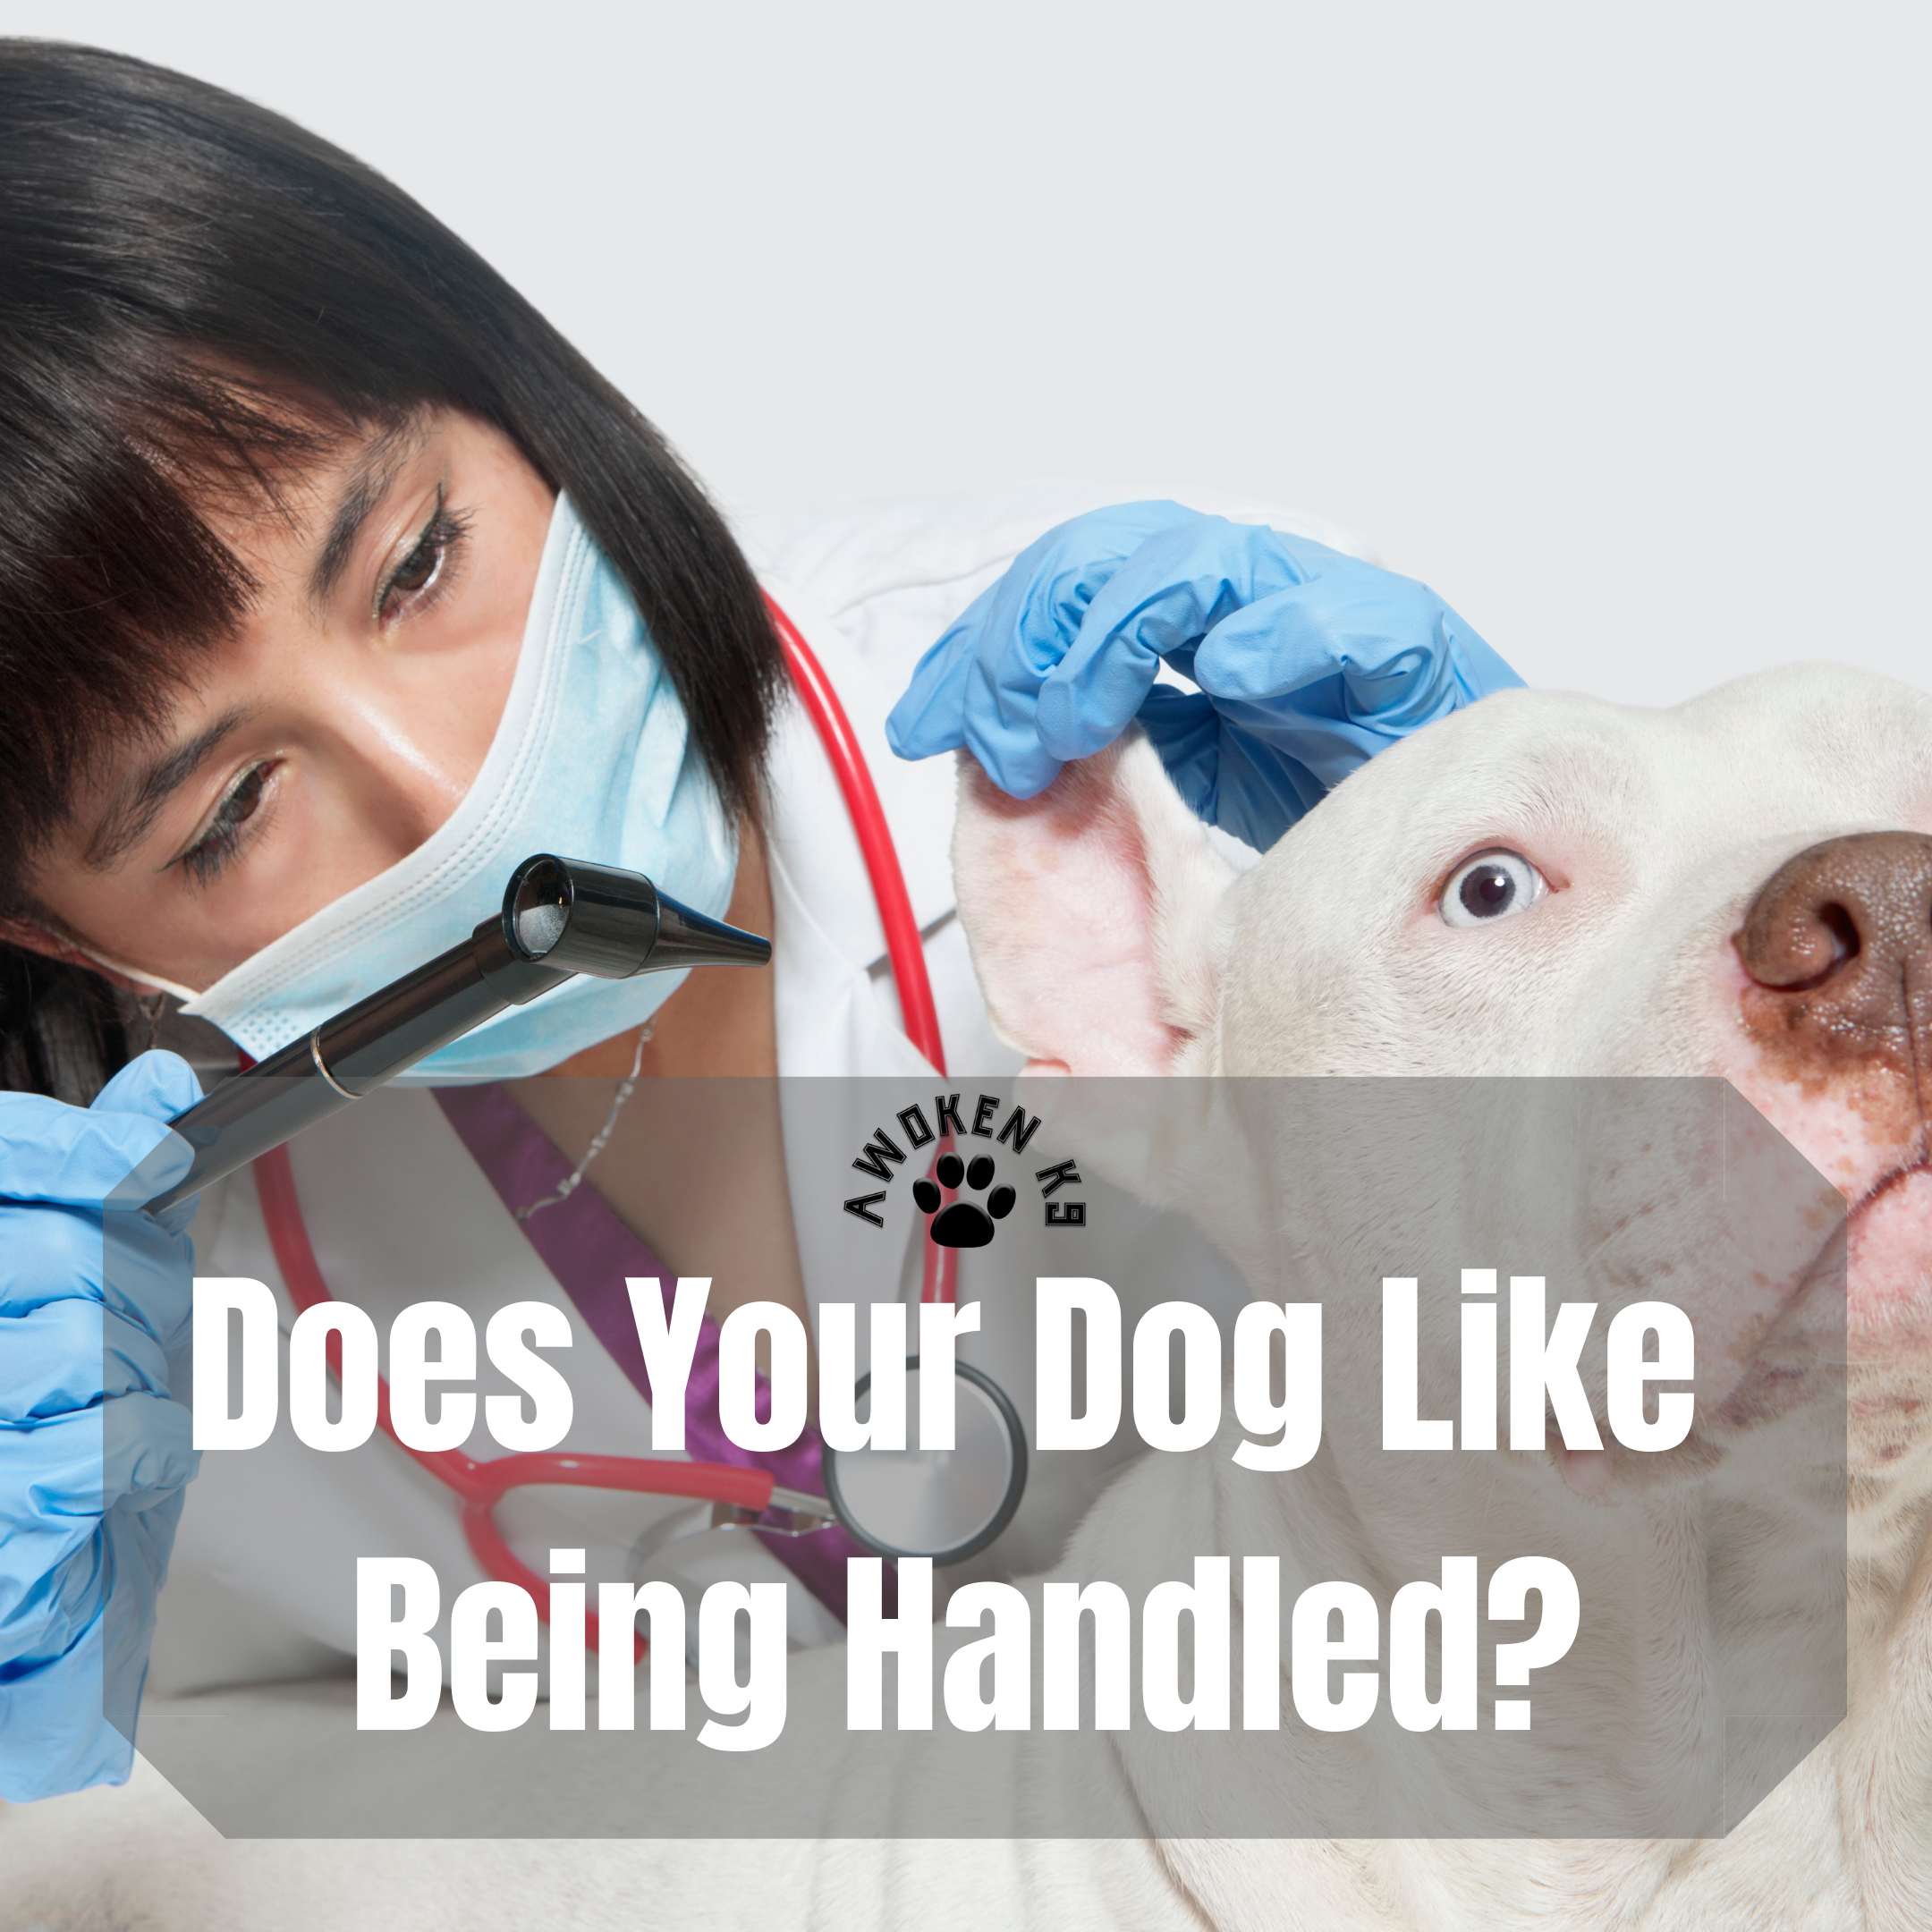 Does your dog like being handled?